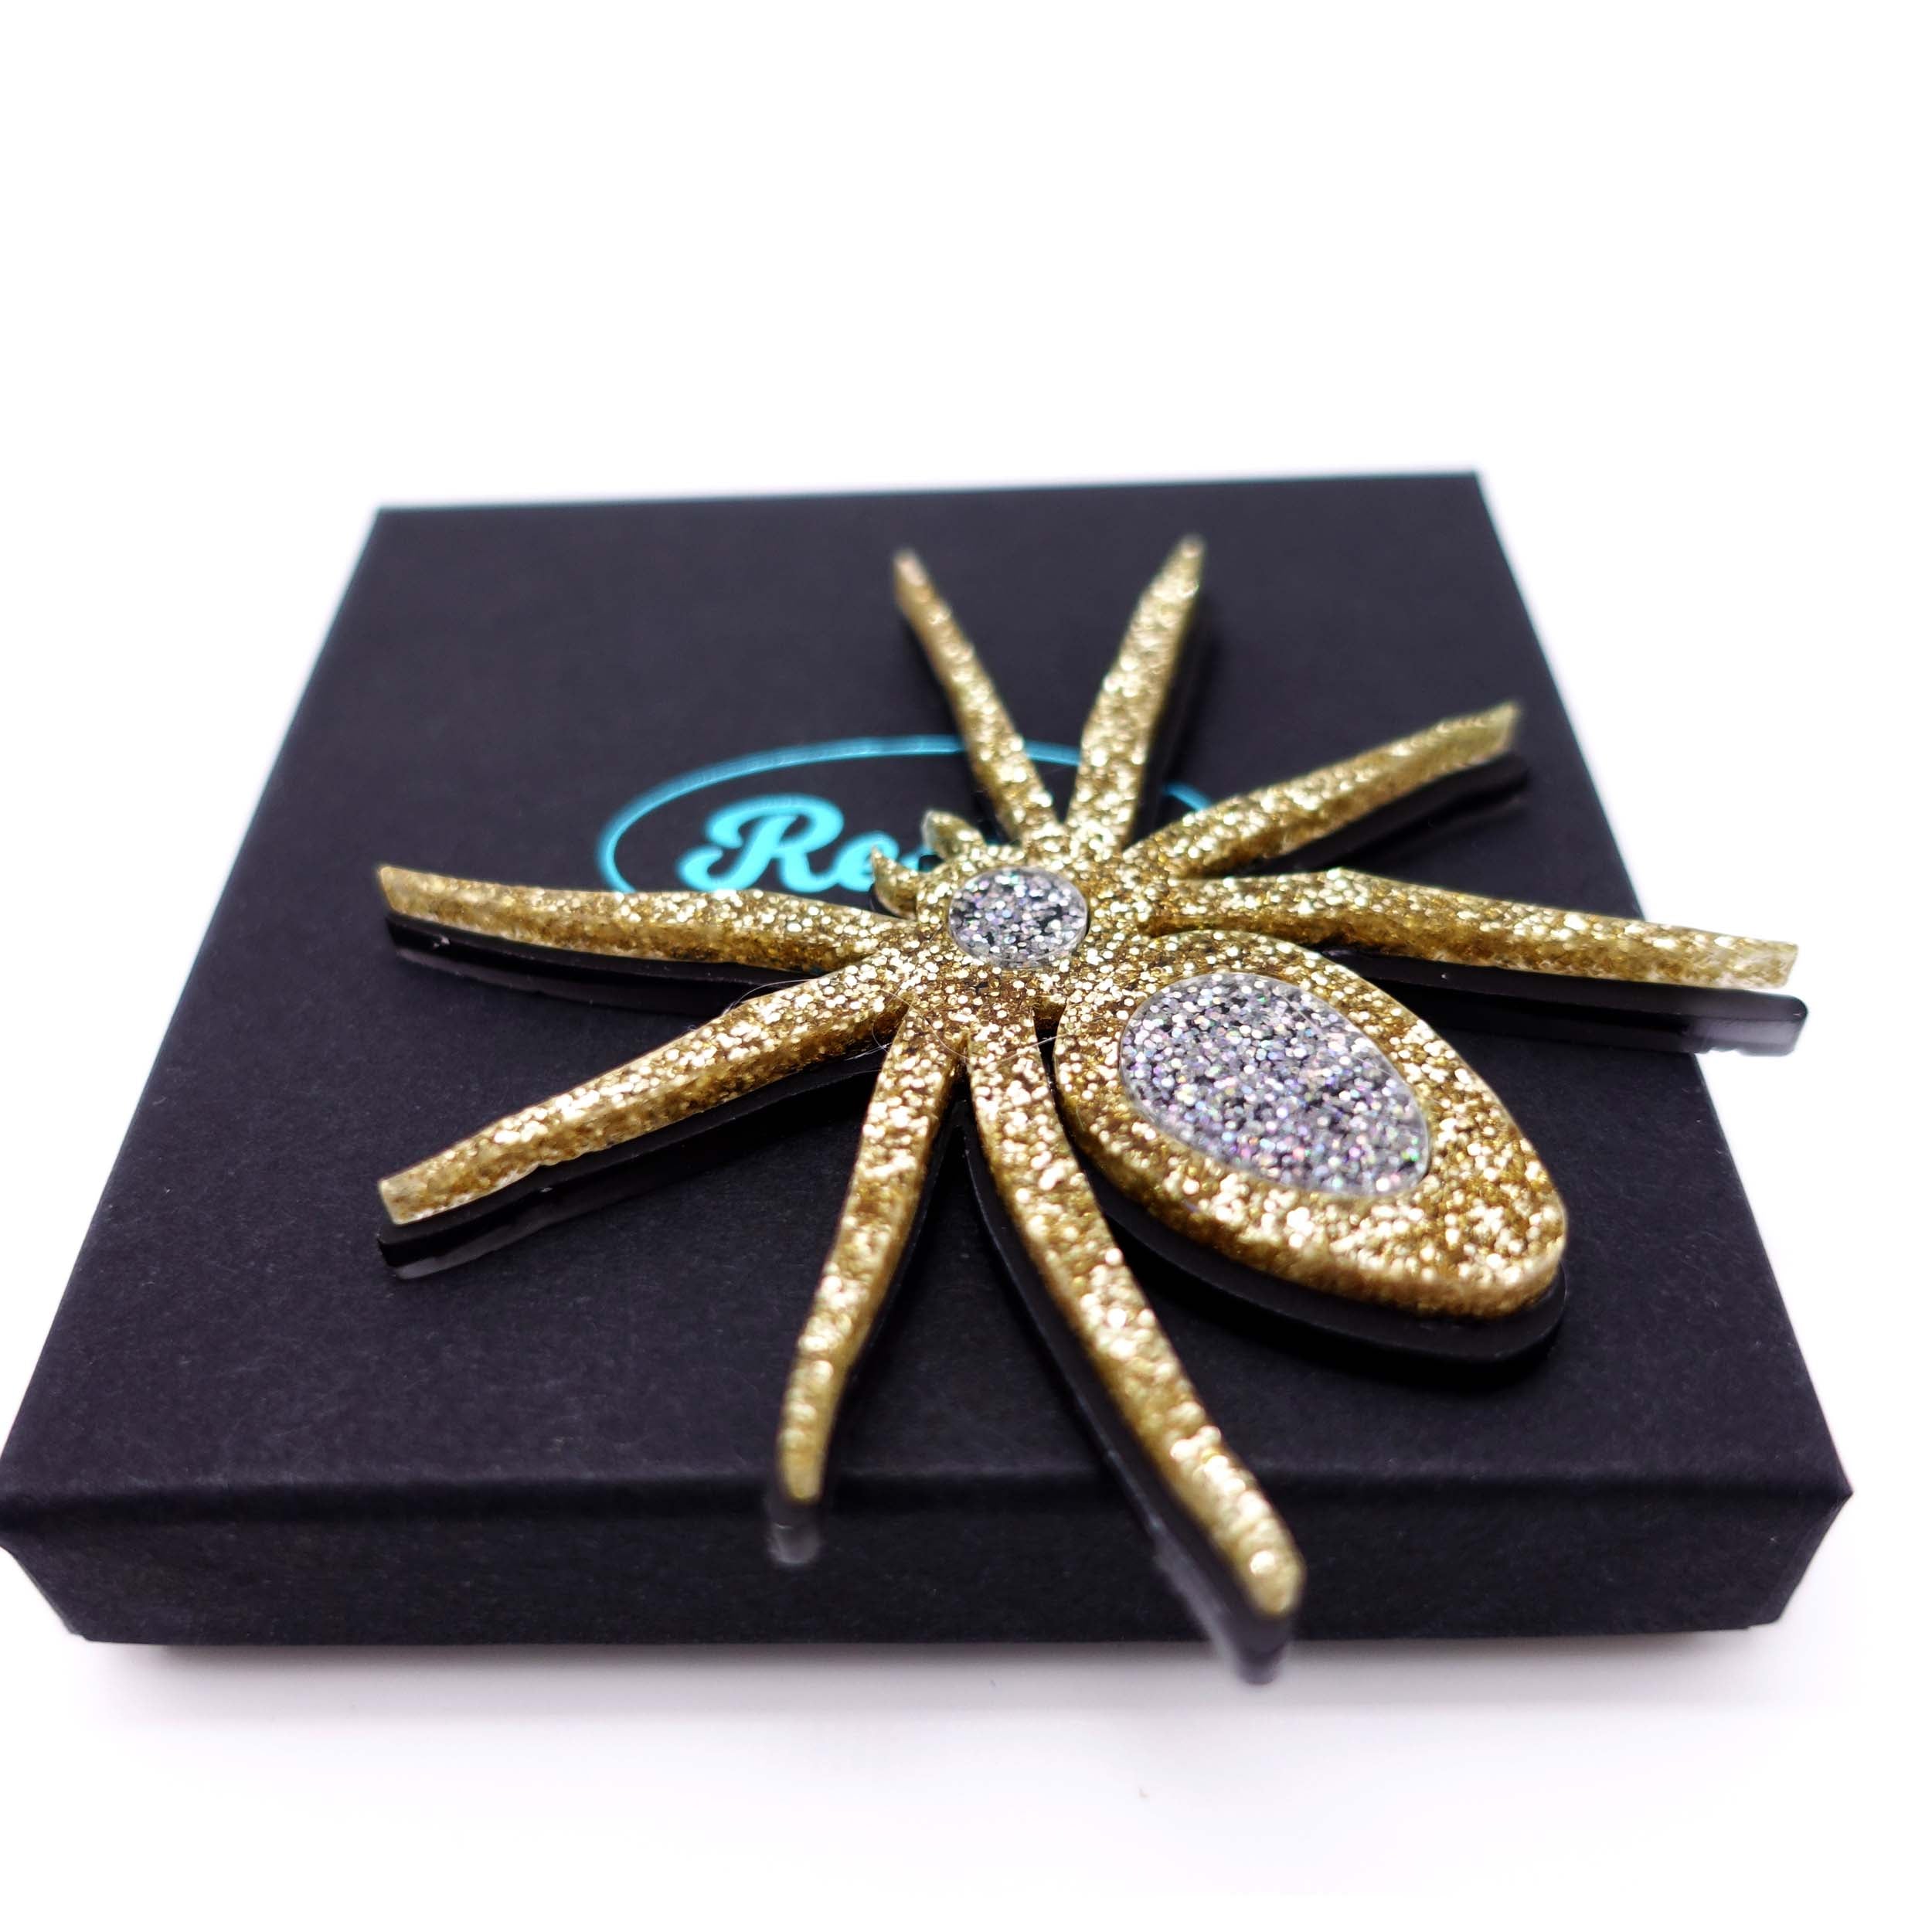 Gold Lady Hale spider brooch. £2 goes to Women for Refugee Women. 